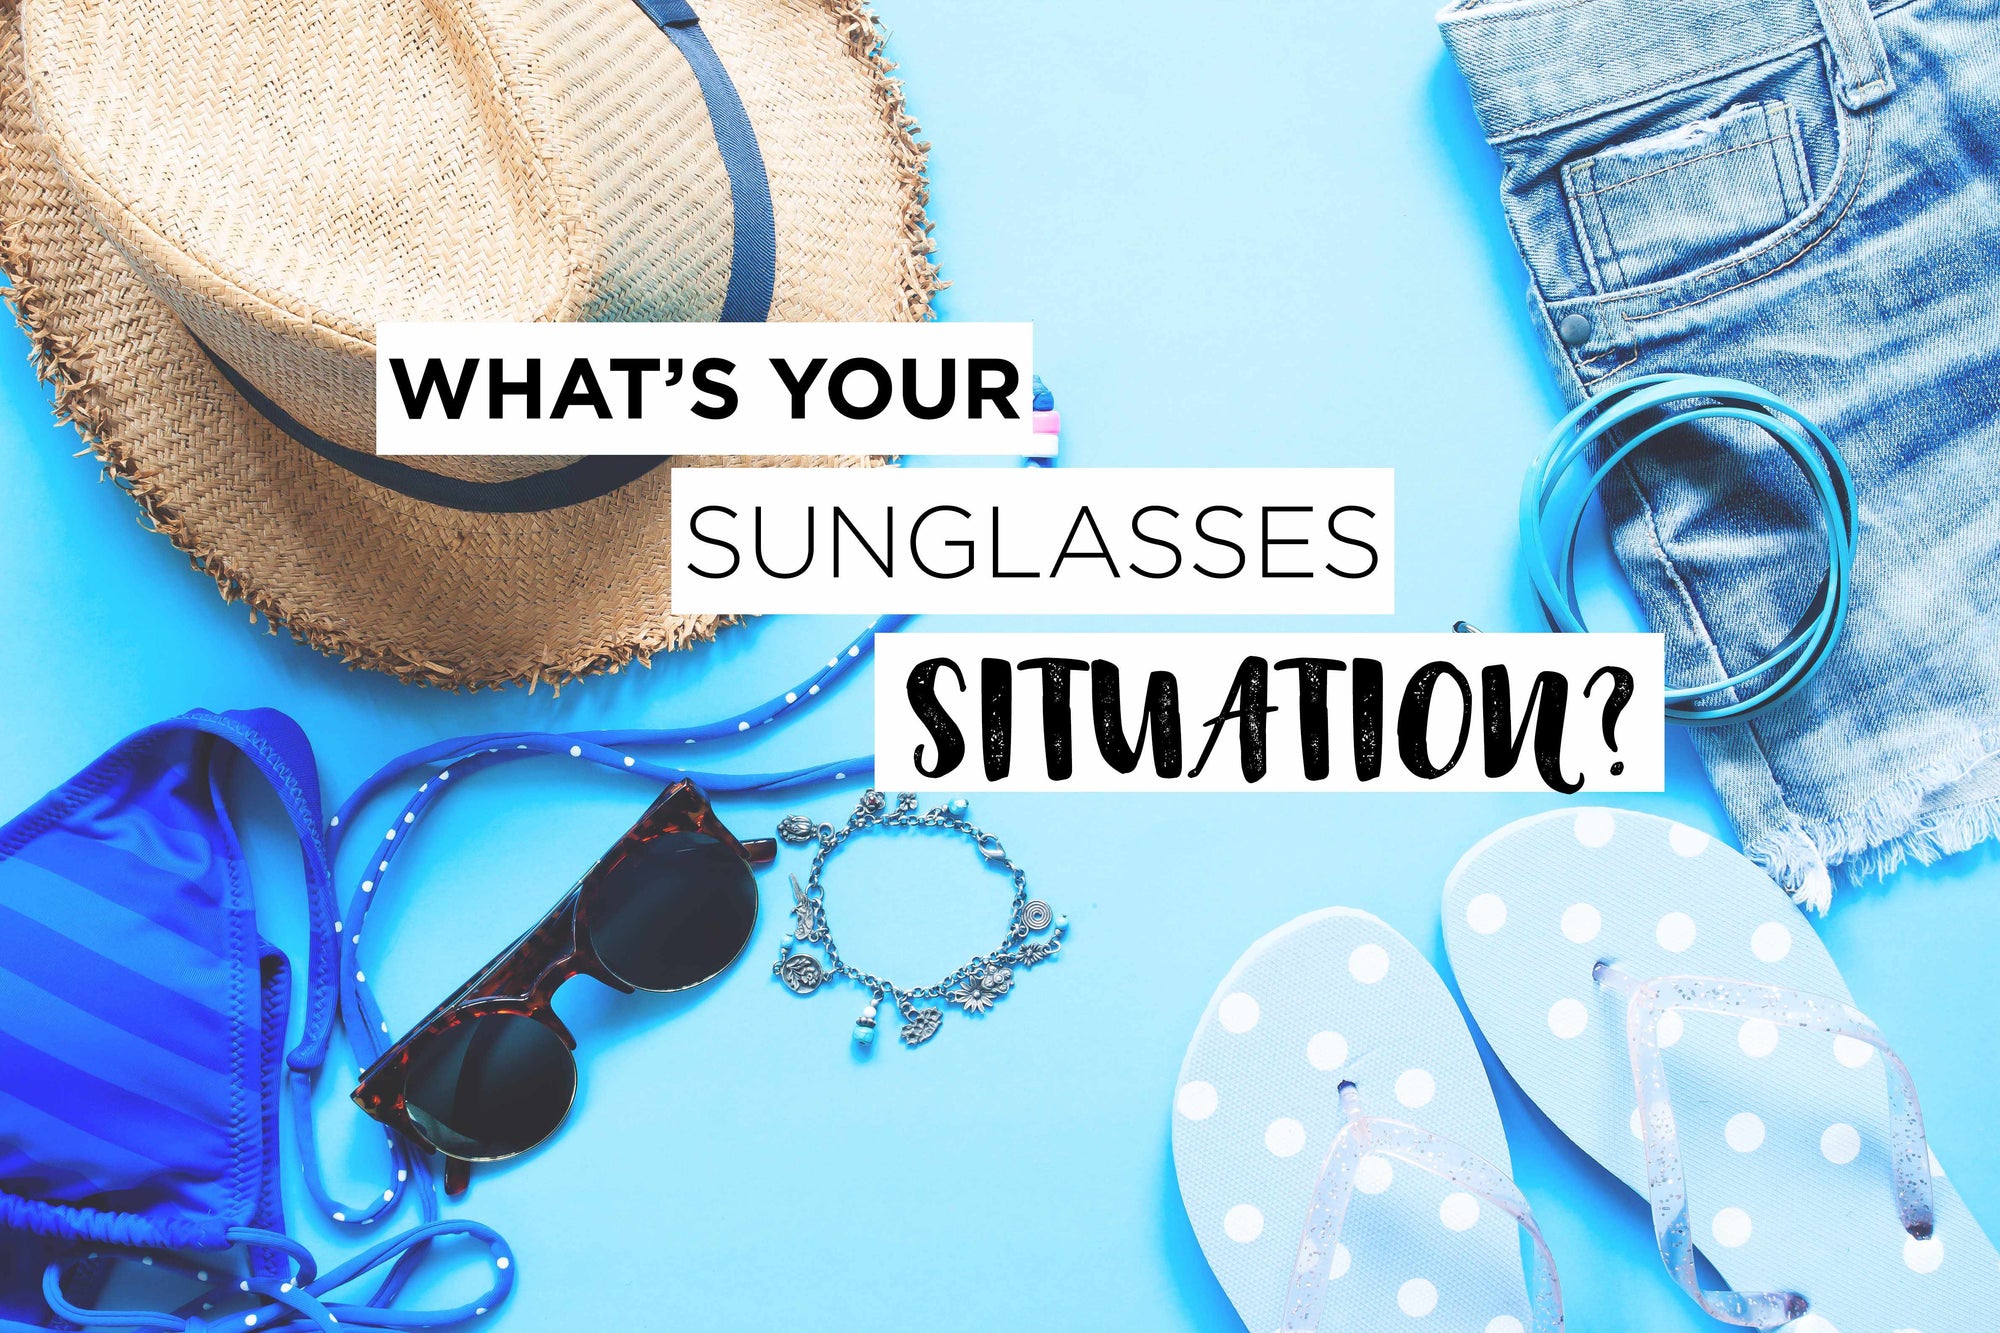 5 Sunglasses You Can Wear Depending on Your Summer Situation